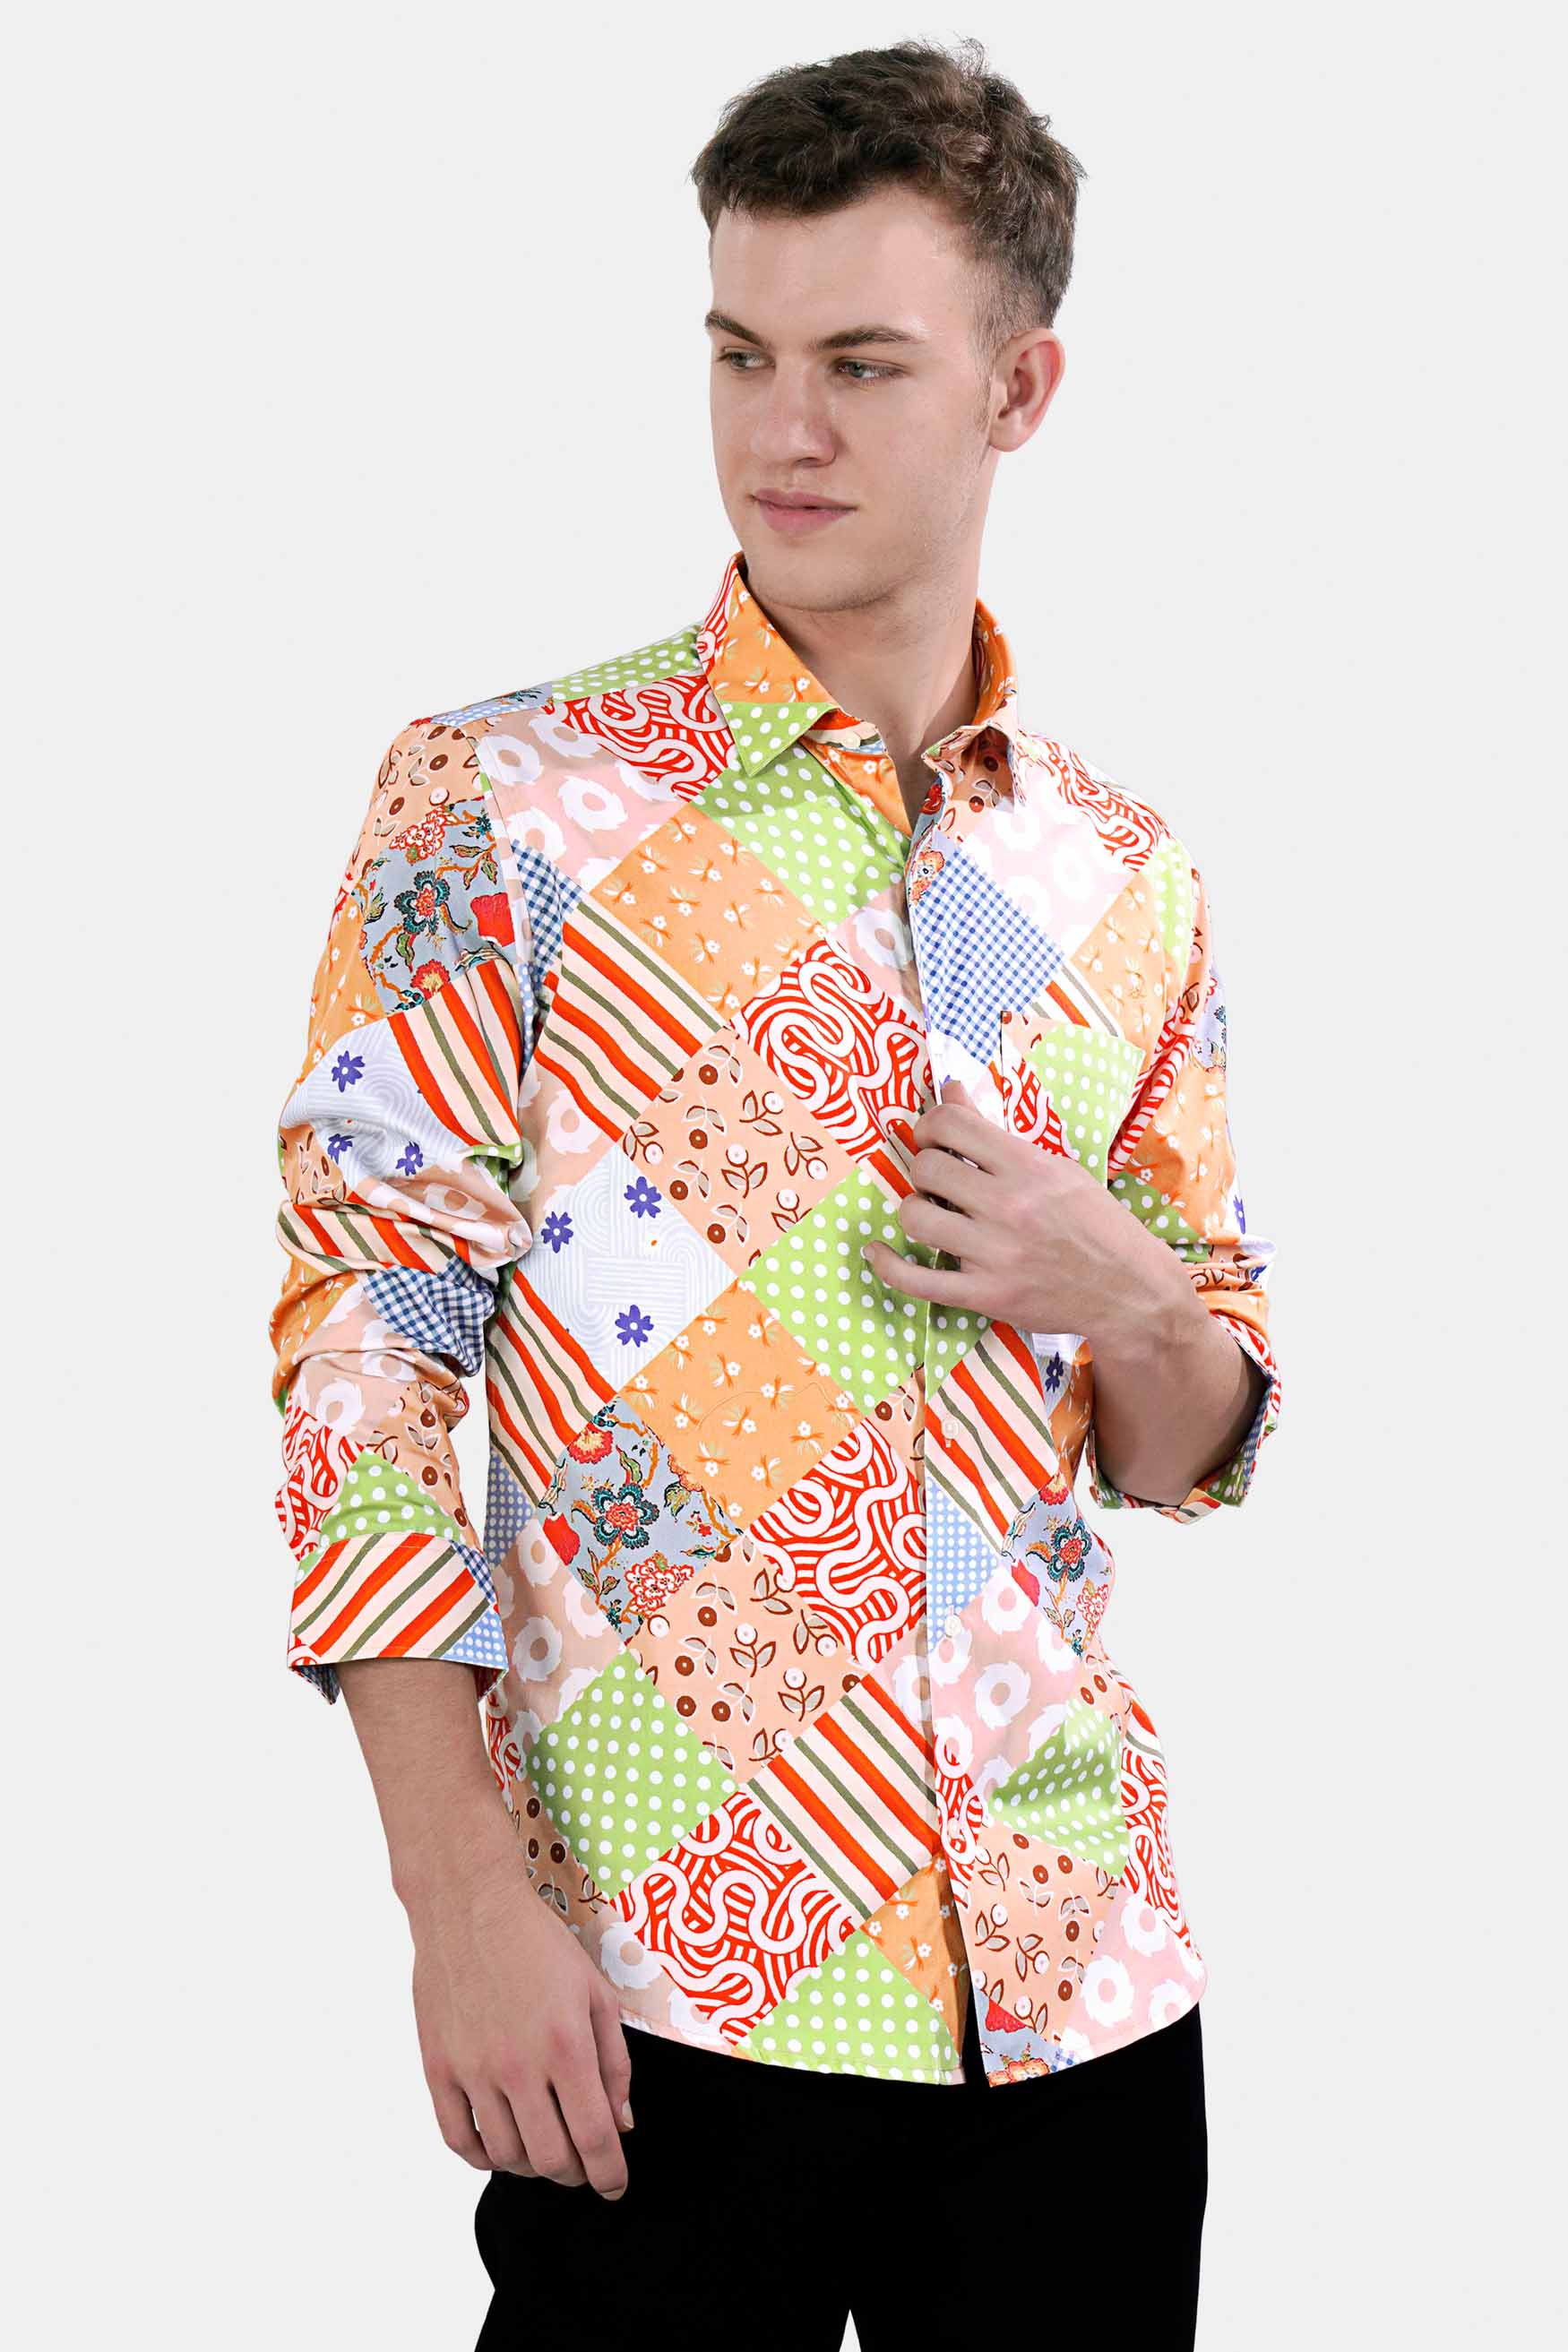 Mandys Peach and Olive Green Multicolour Abstract Printed Subtle Sheen Super Soft Premium Cotton Shirt